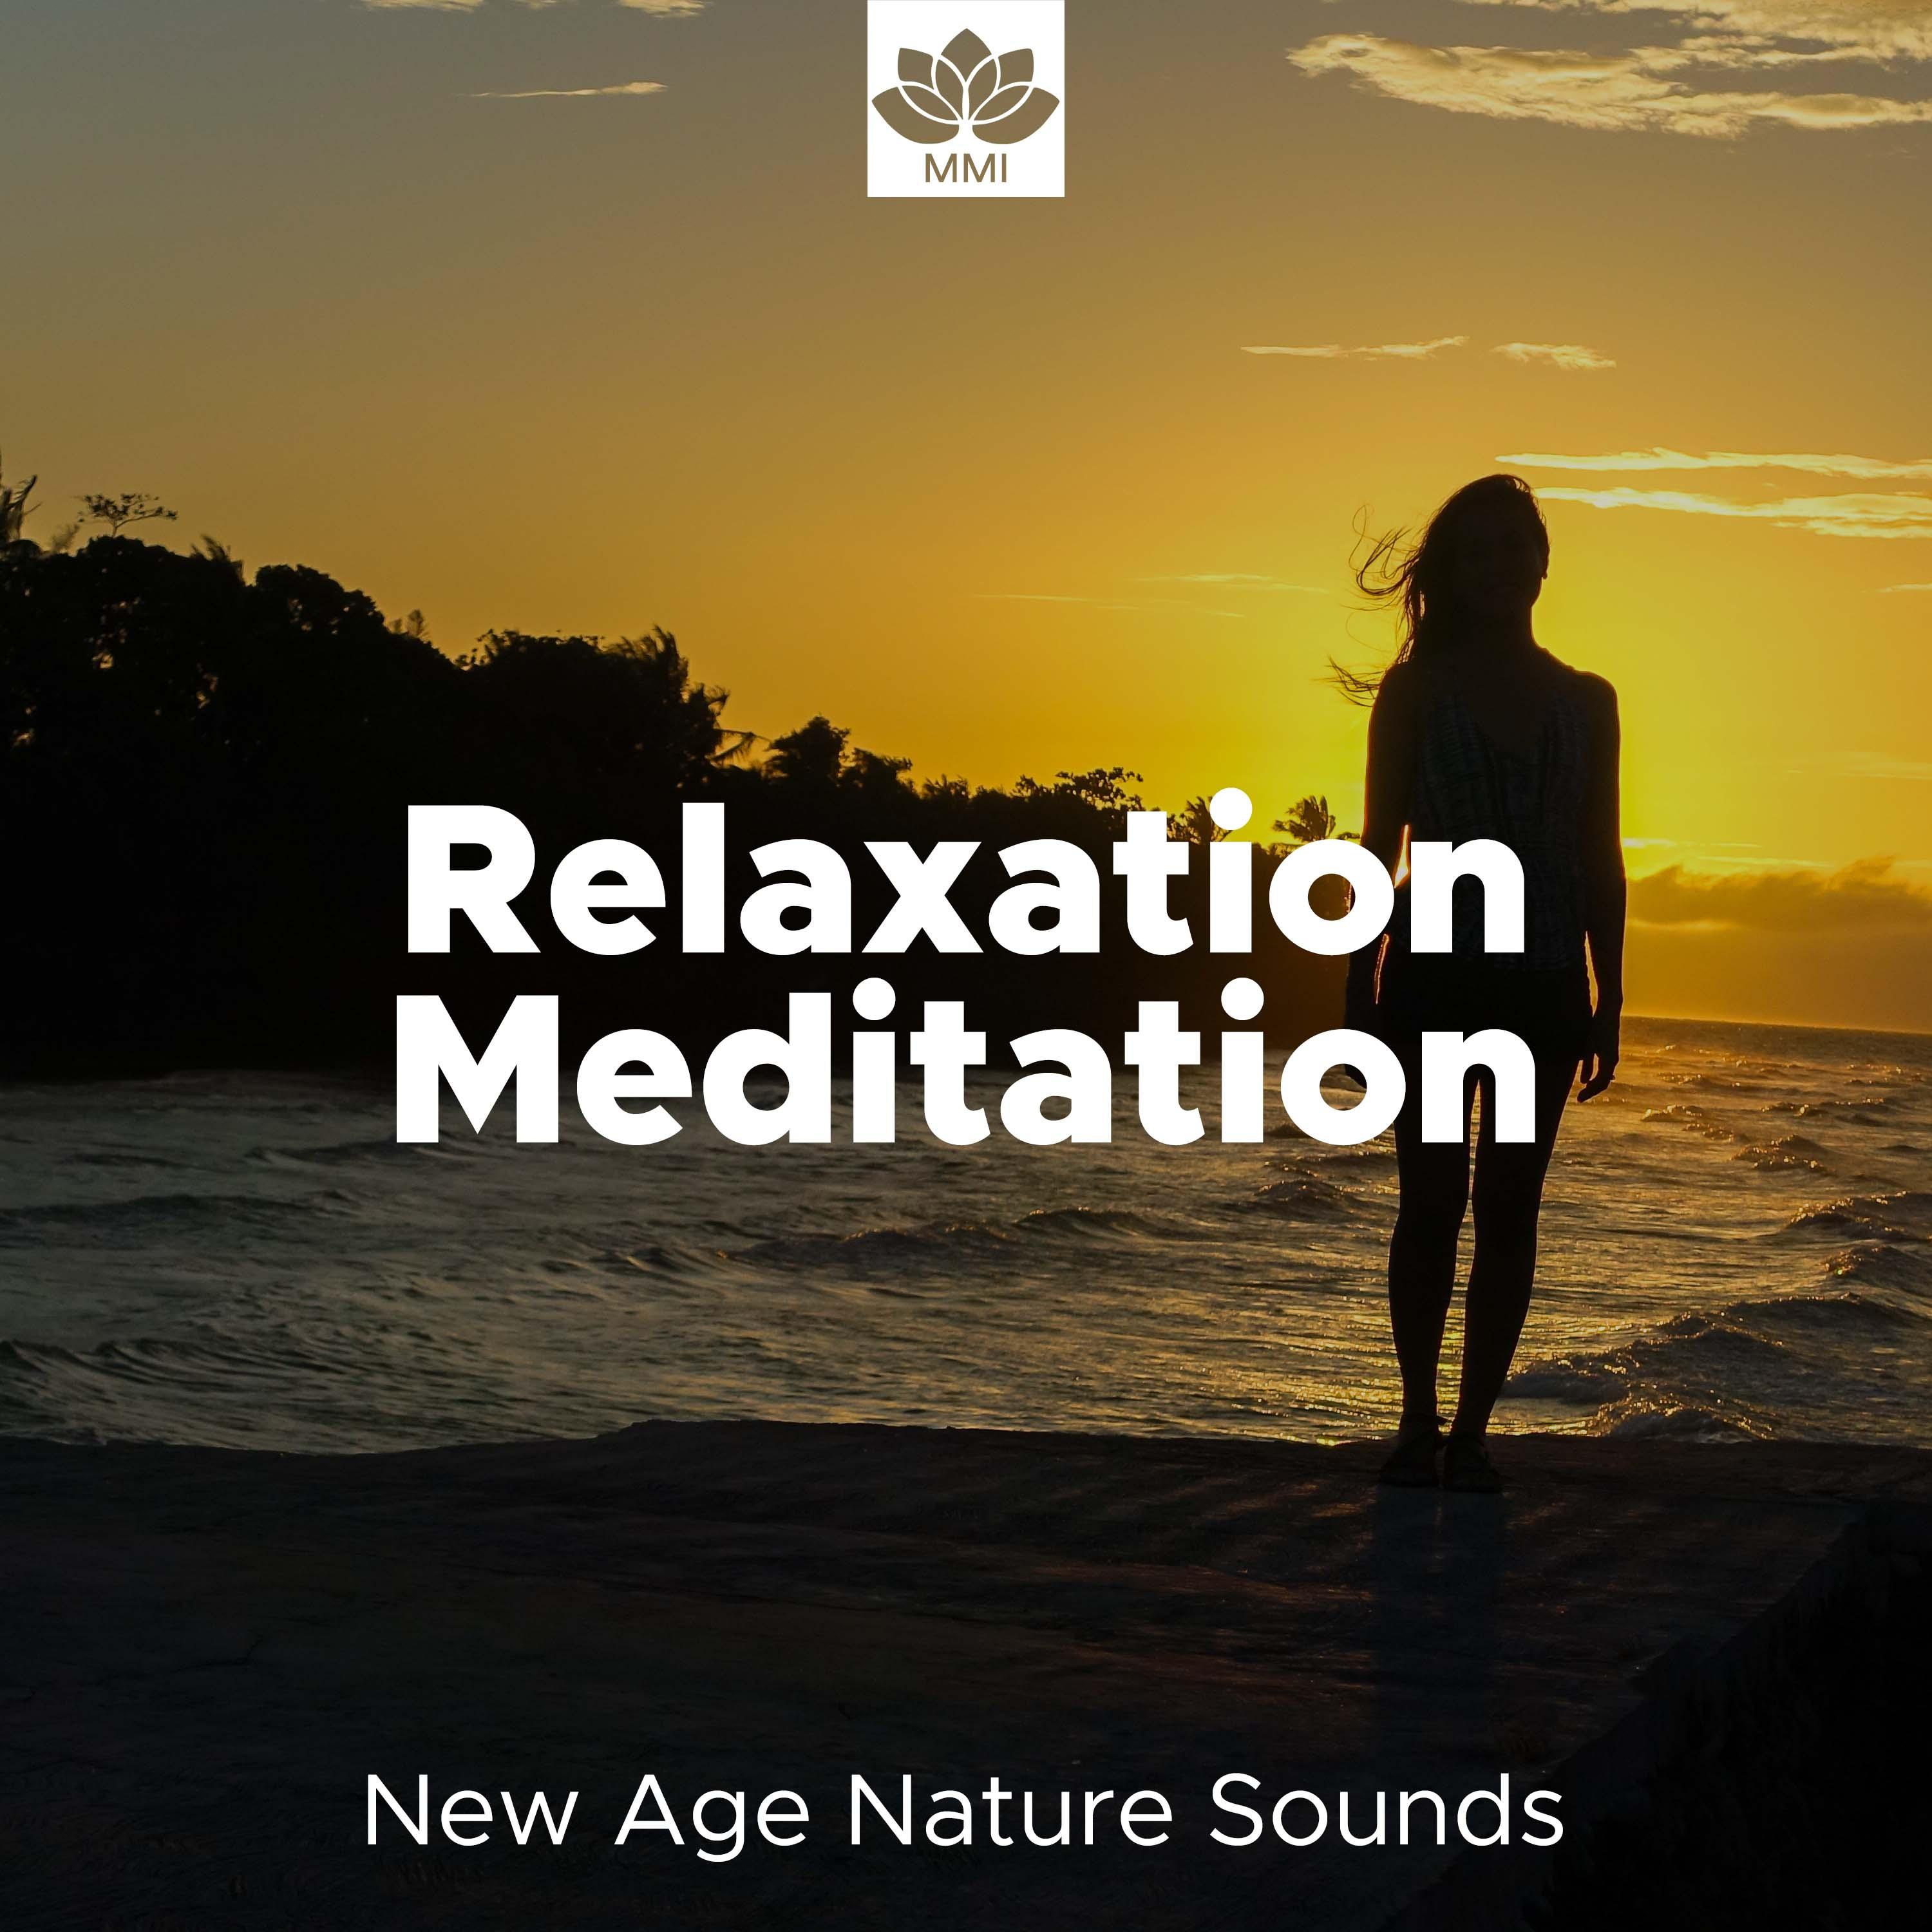 New Age and Nature Sounds for Relaxation Meditation